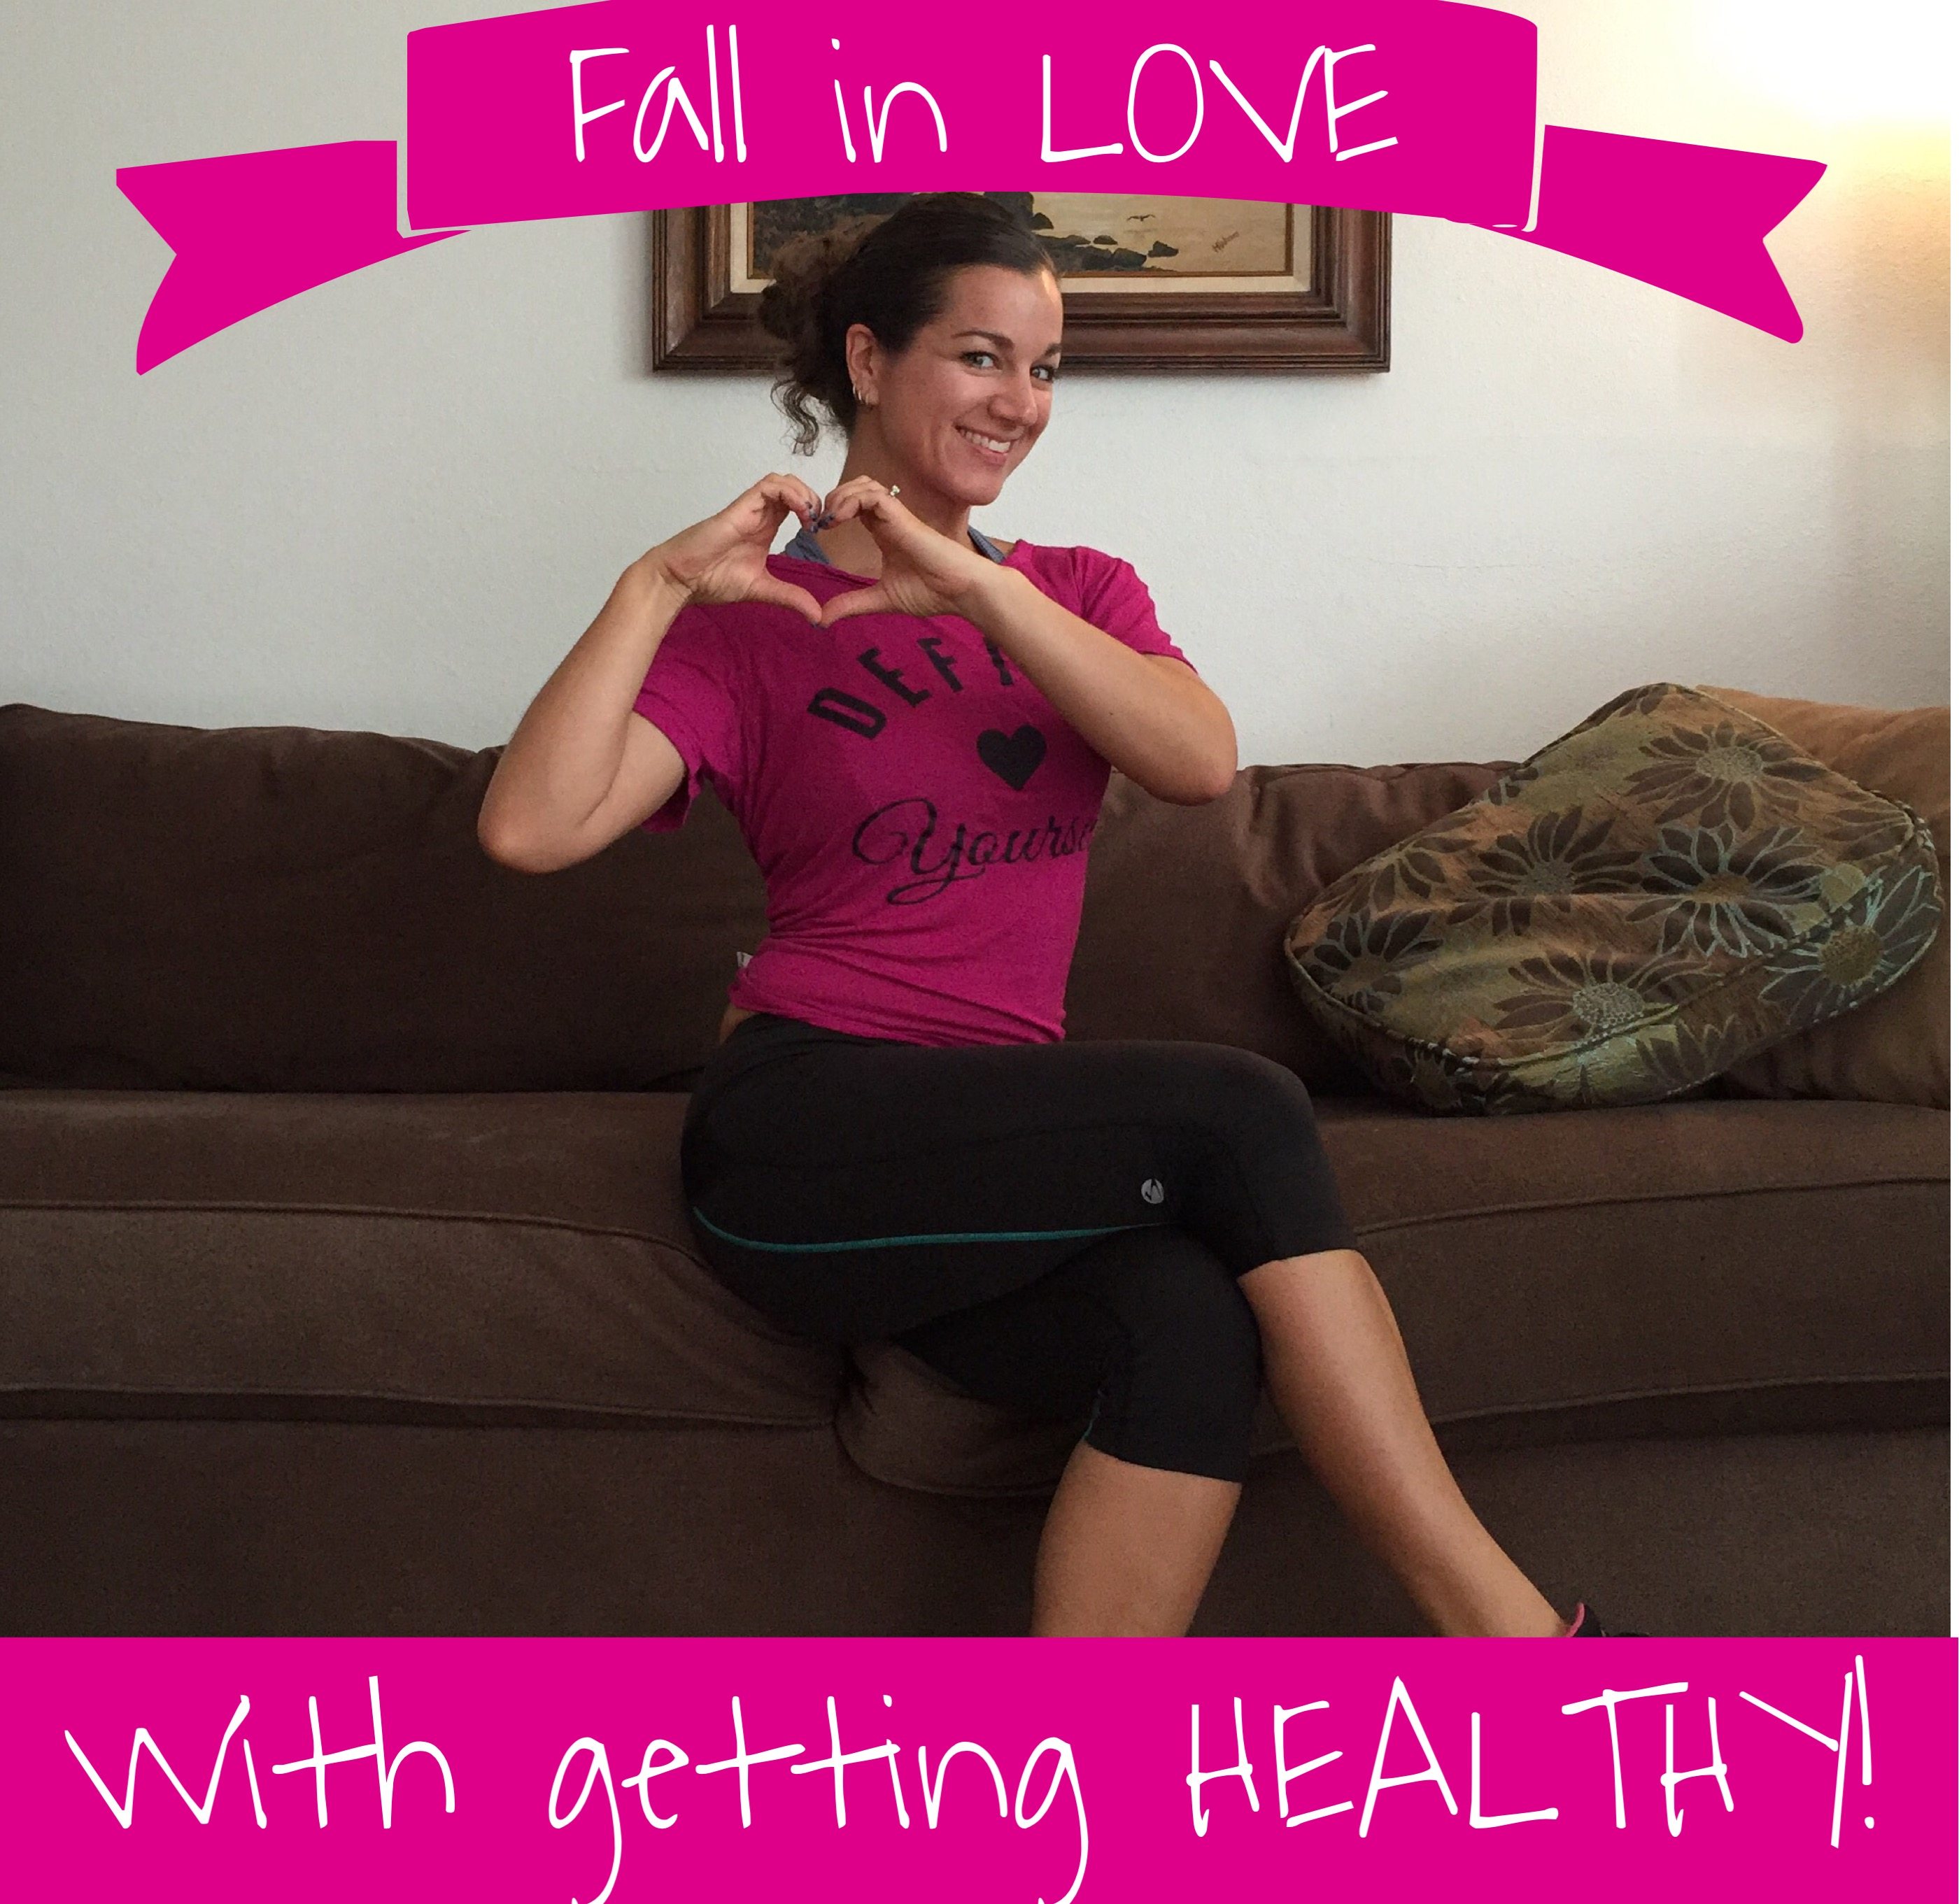 Fall in LOVE with Health!